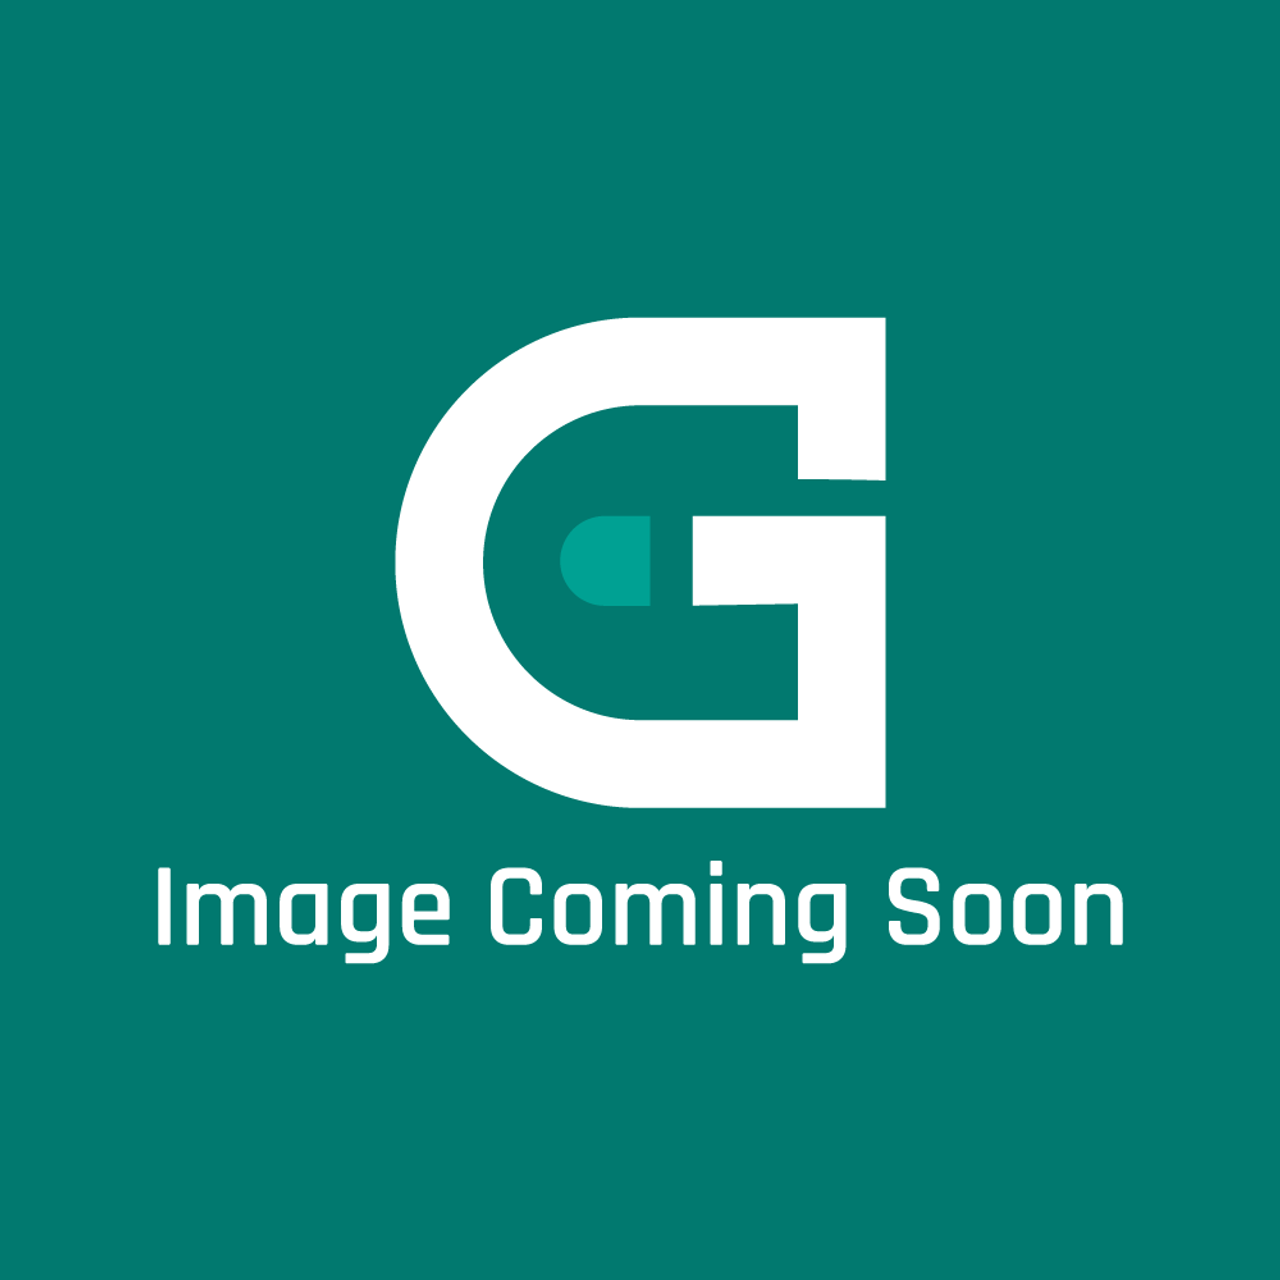 AGA Marvel R1812 - Oven Top Back Flue Plate (Rs5M1-16193D) - Image Coming Soon!